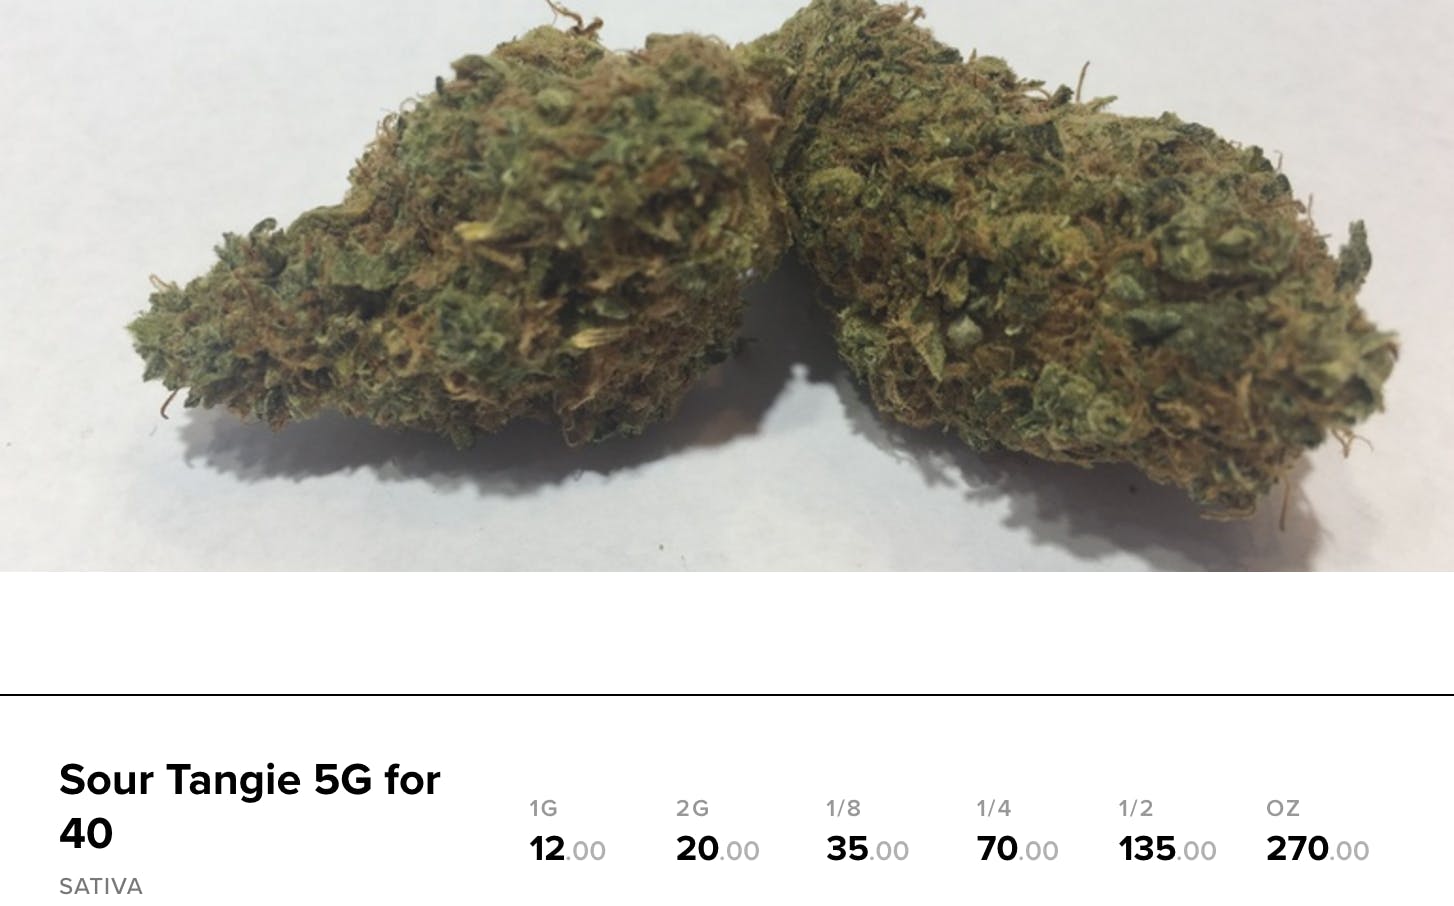 How much does a gram of weed cost : sour tangie